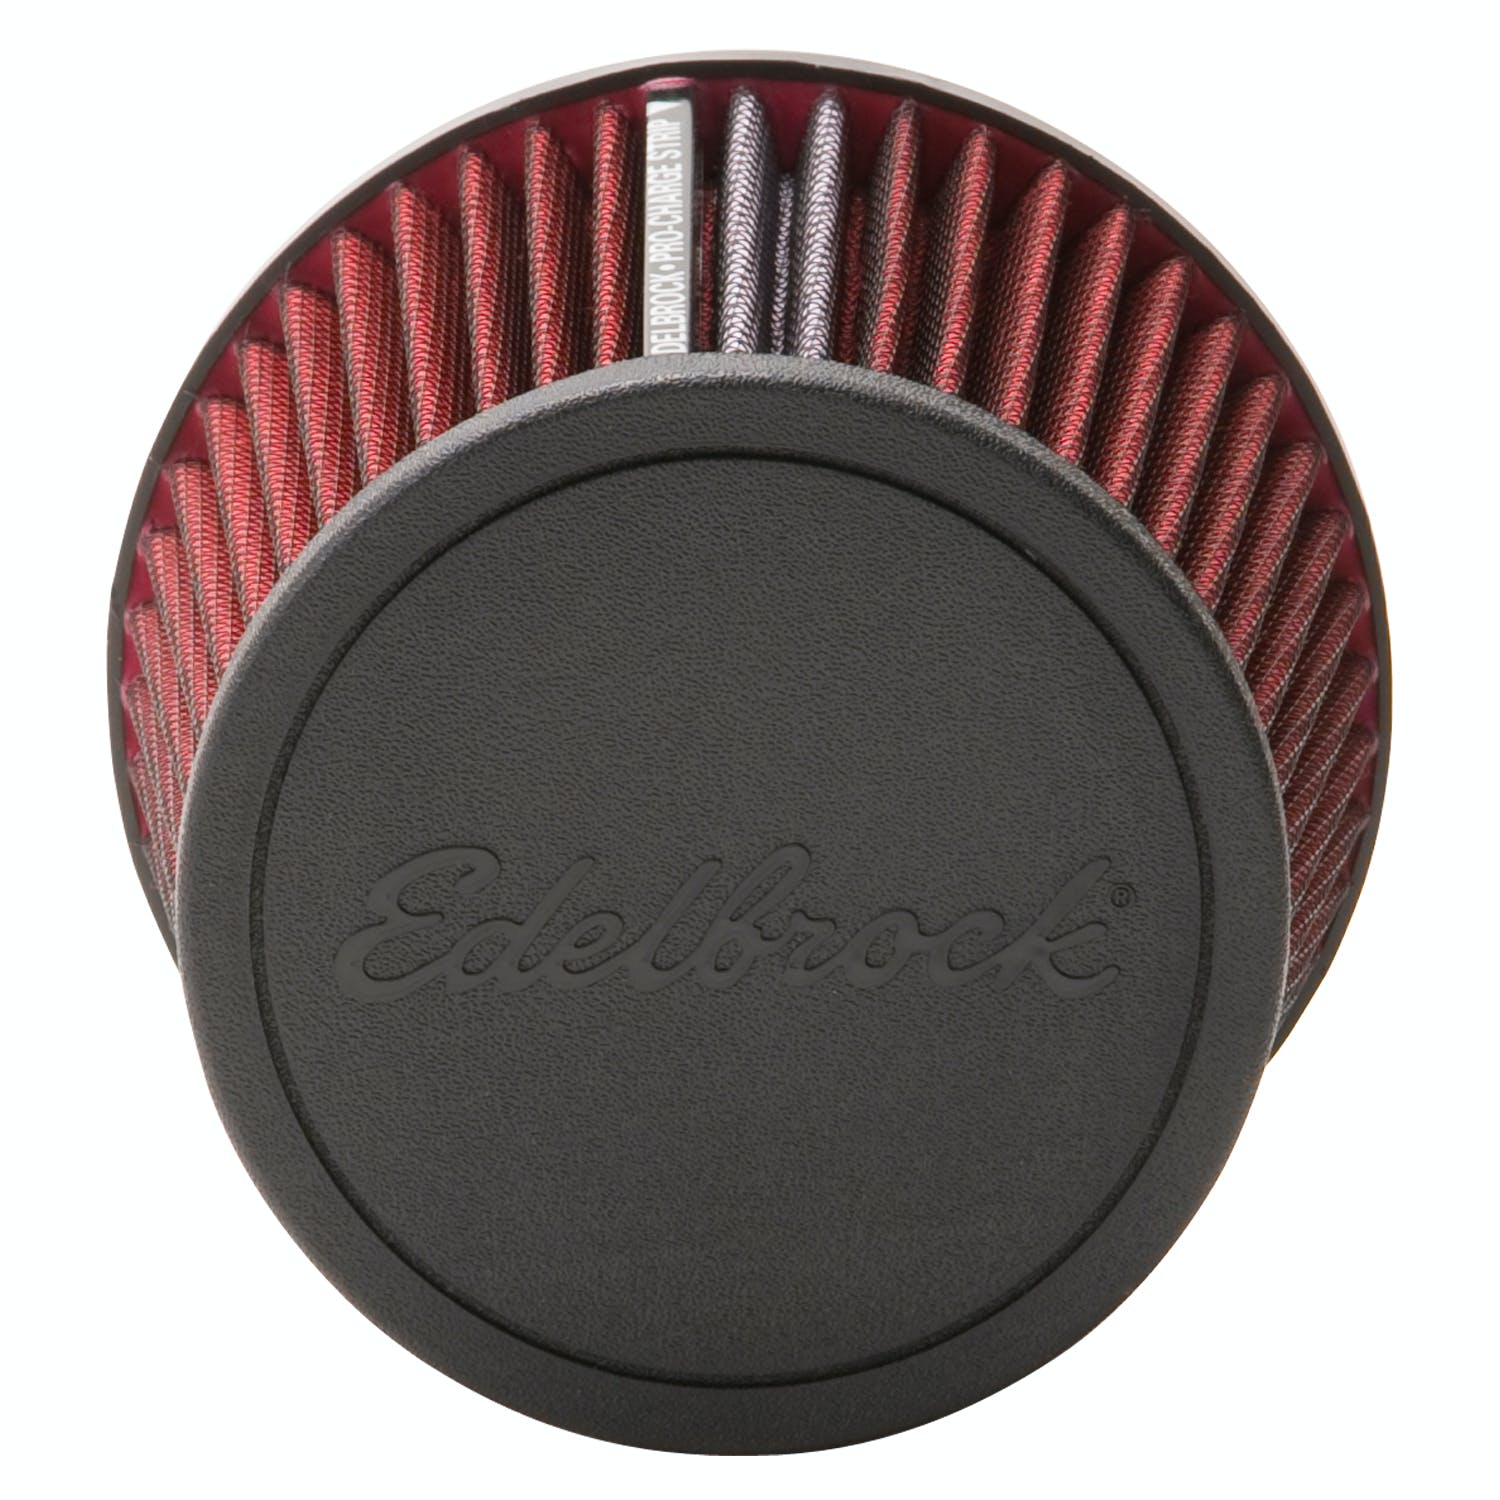 Edelbrock 43651 Pro-Flo Universal Red Conical Air Filter with 3 Inlet